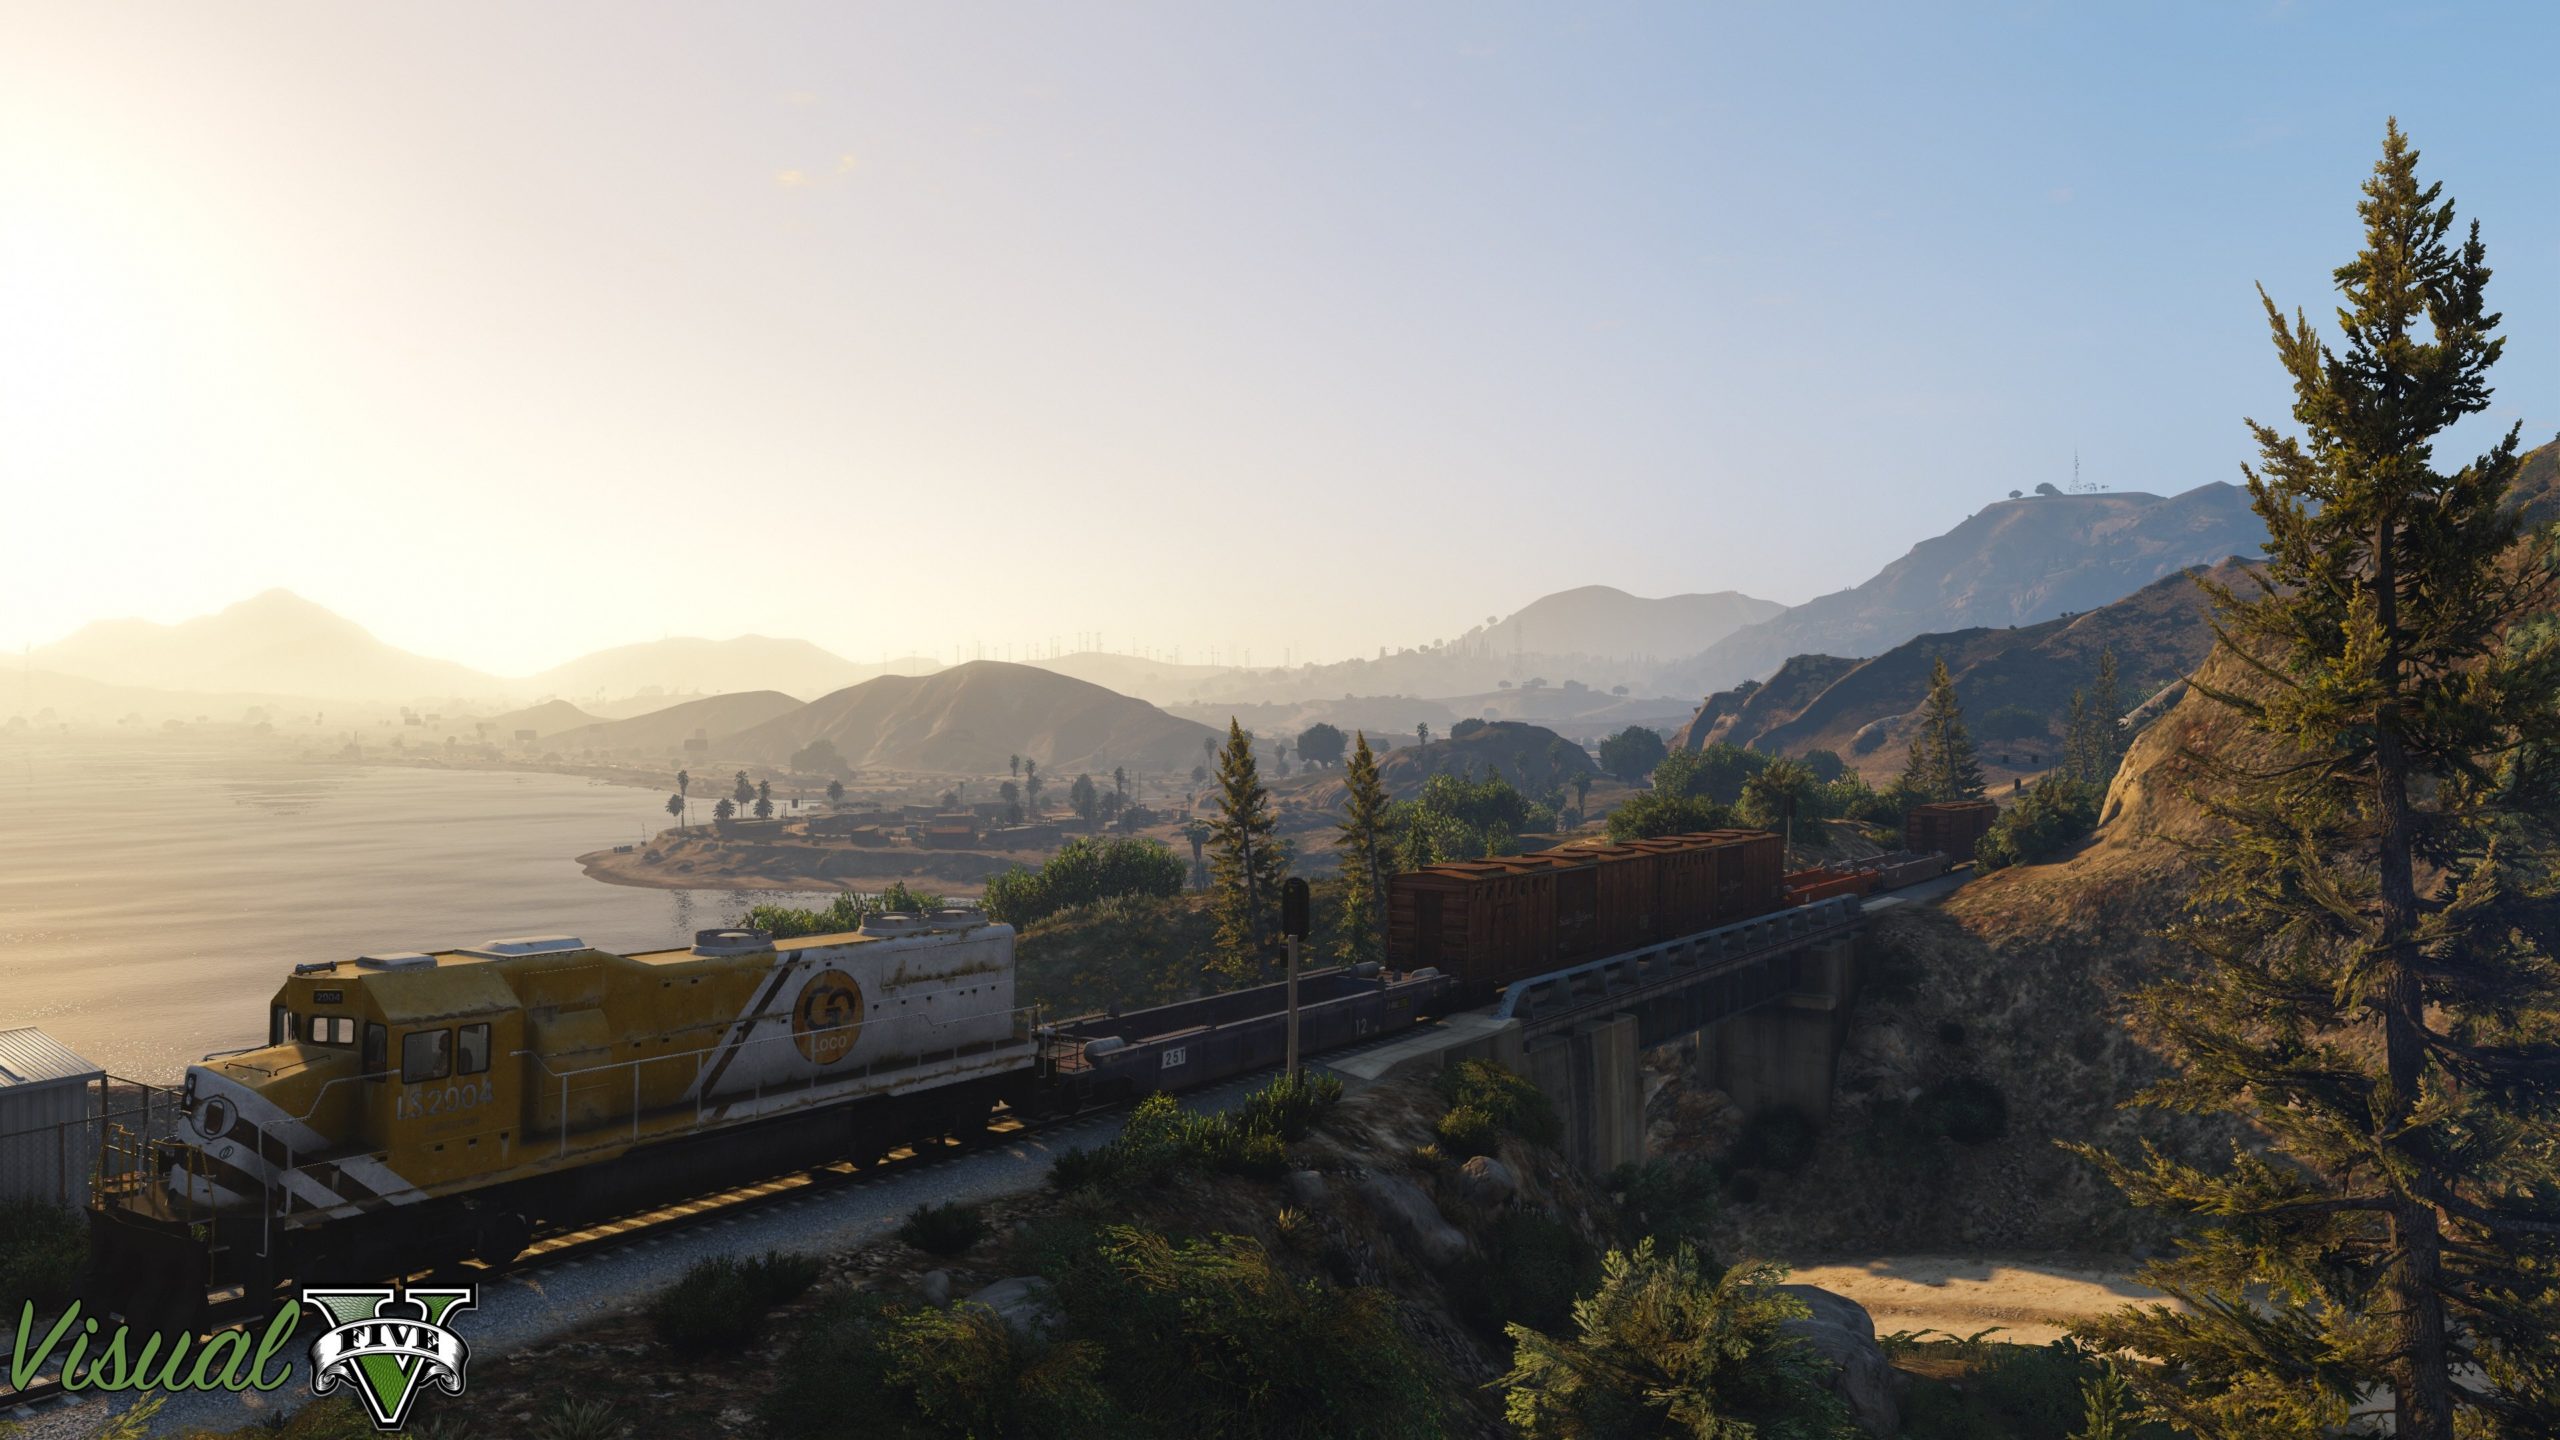 Stunning New GTA V Mod Beset With Claim That Some Of Its Code Was Stolen